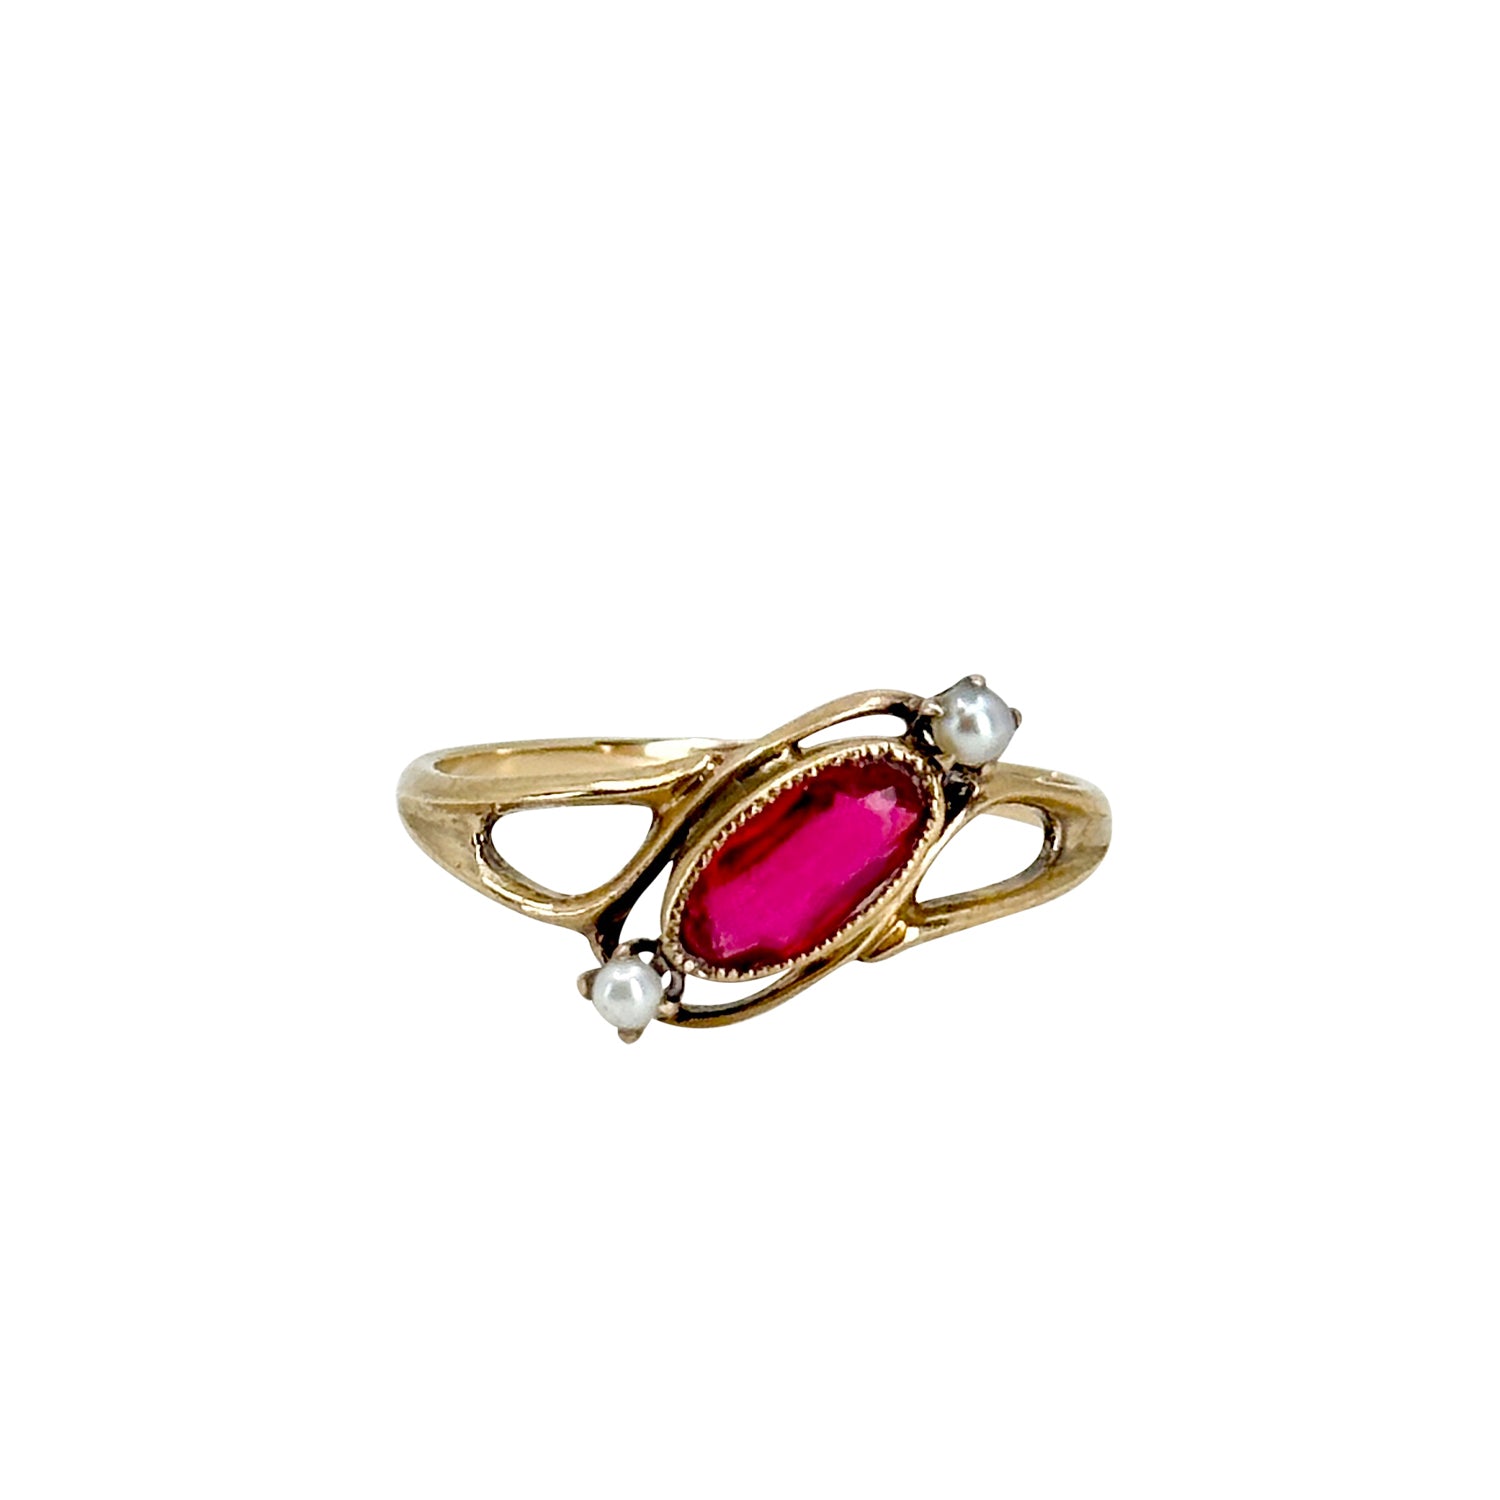 Ostby Barton Art Deco Japanese Saltwater Akoya Cultured Pearl Synthetic Ruby Ring- 10K Rose Gold Size 7.75